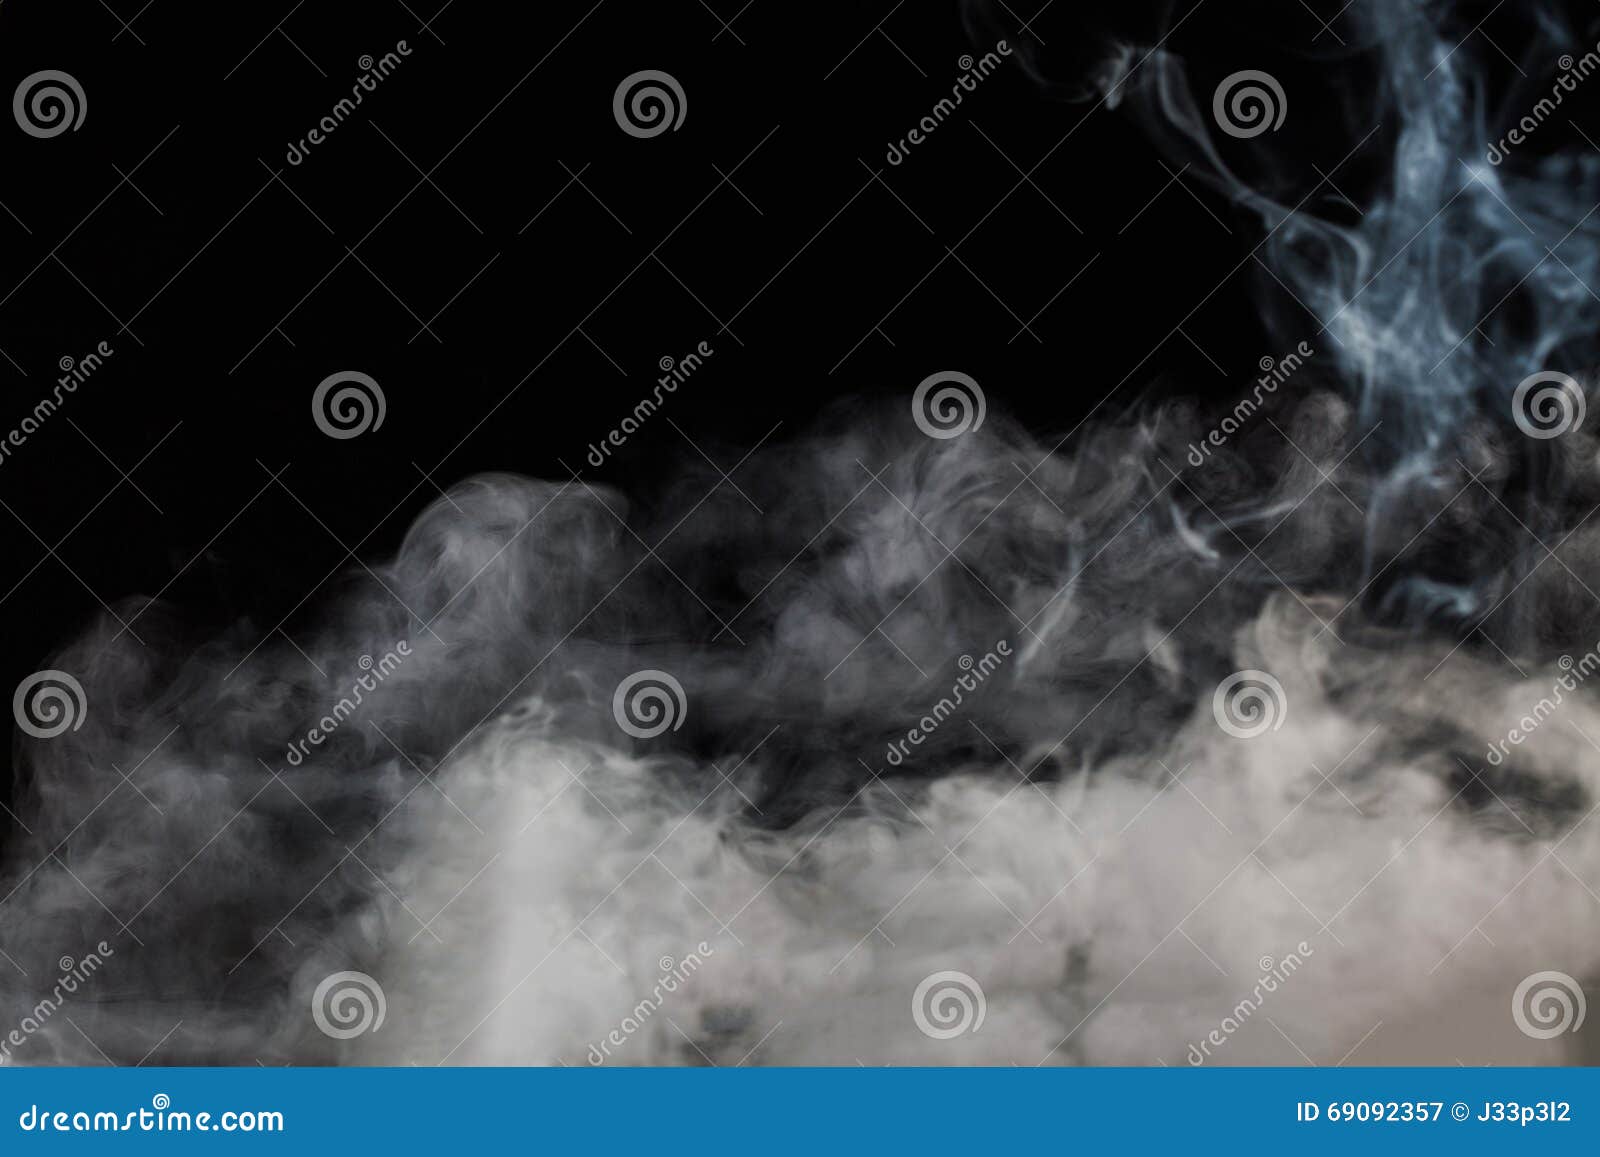 smoke fragments on a background